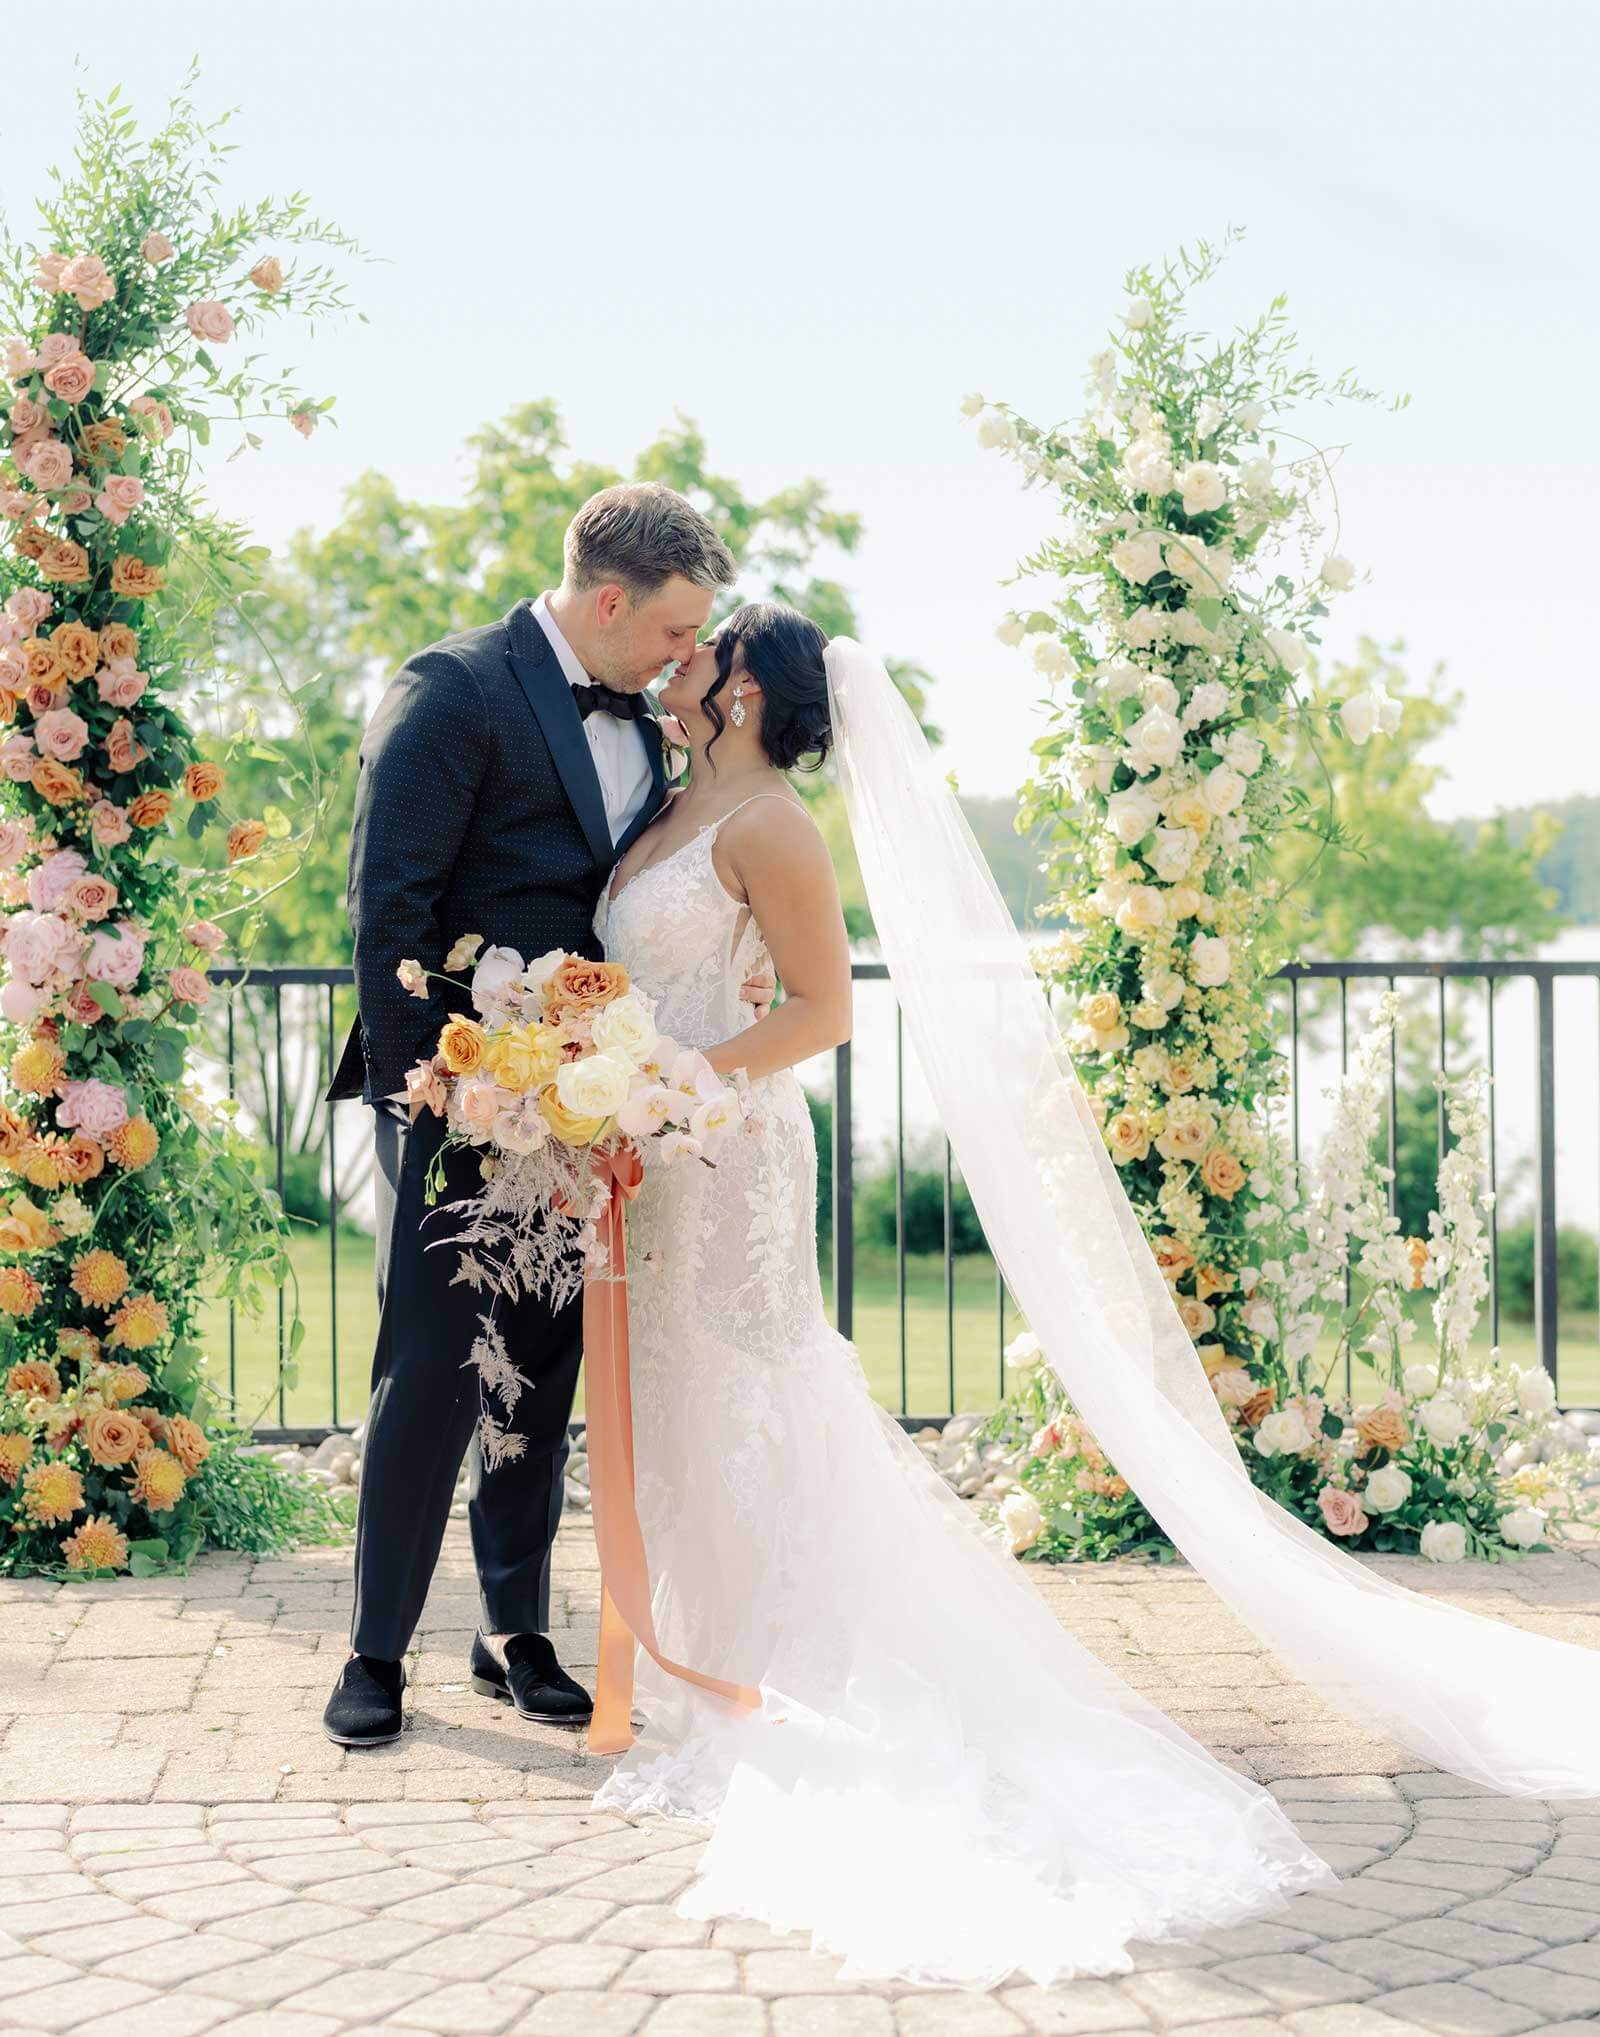 A bride and groom kiss in front of a floral arch.